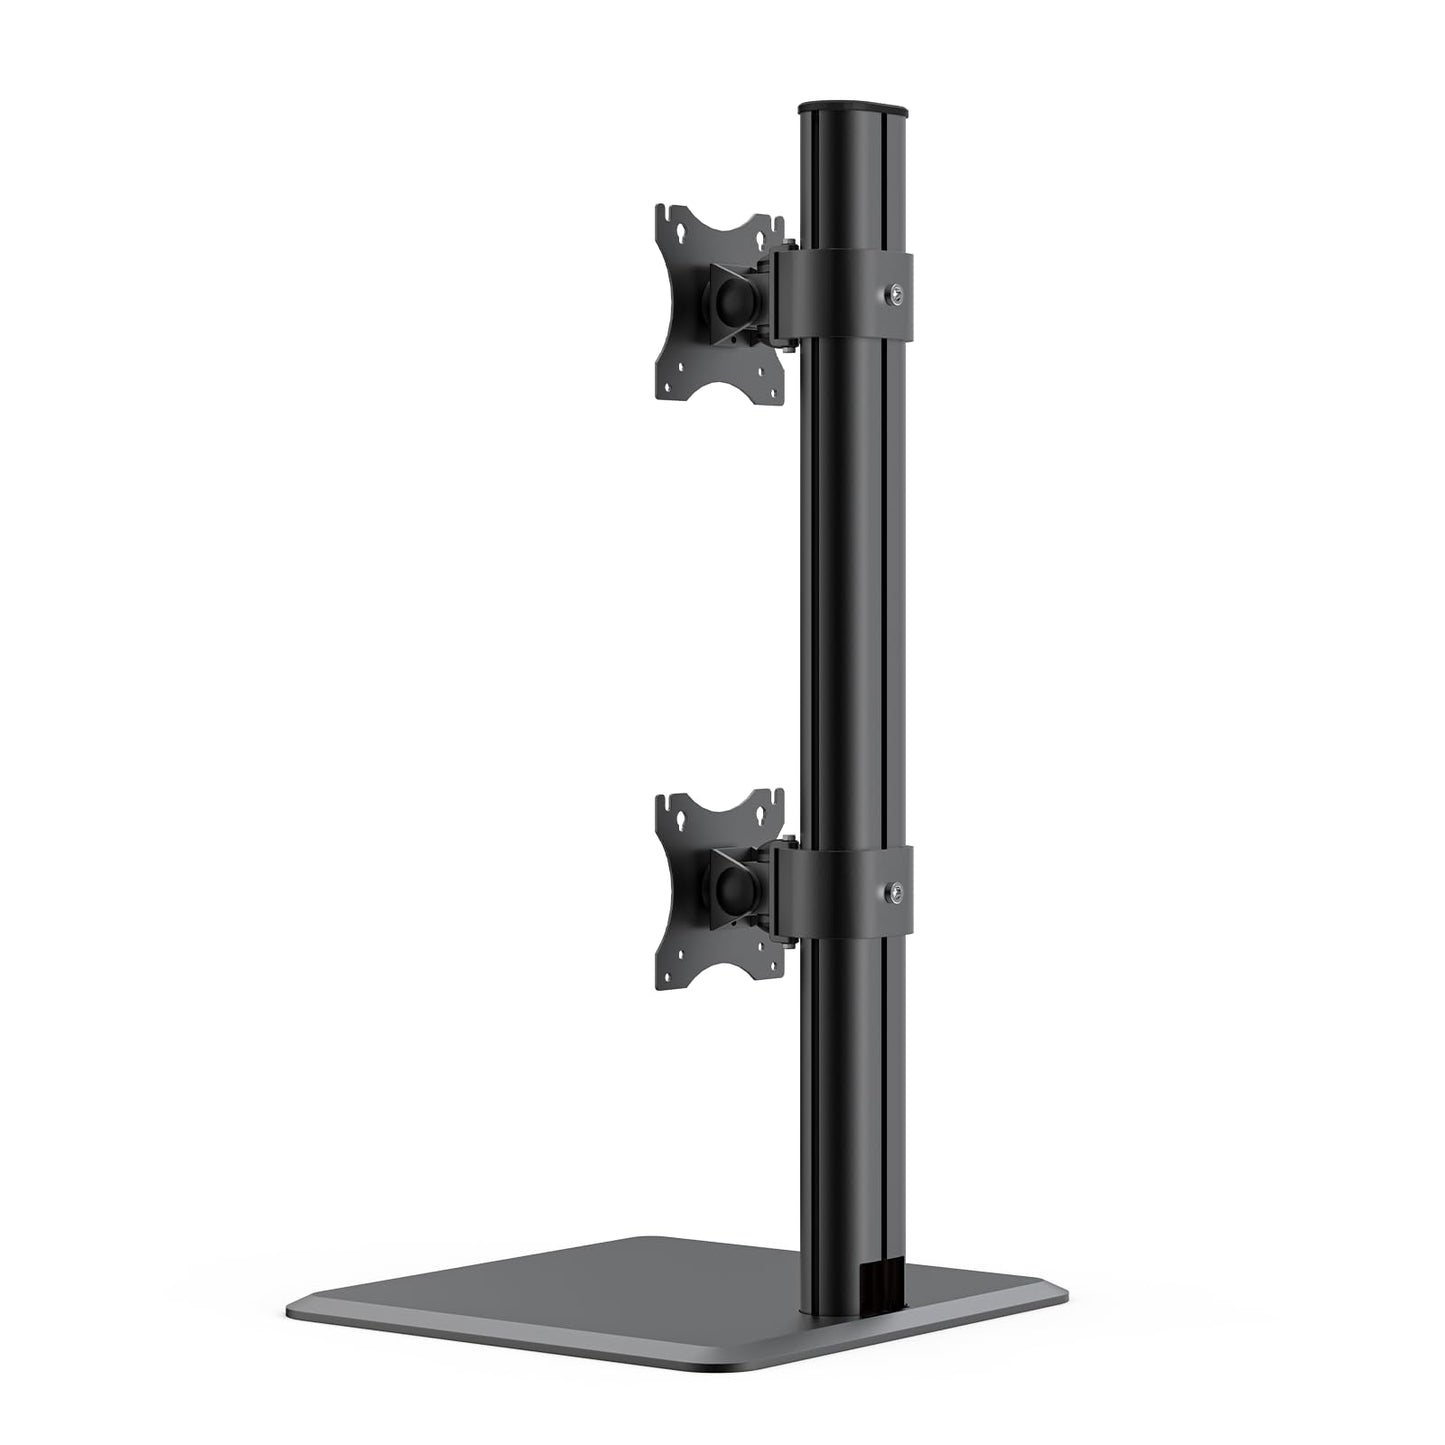 BEWISER Dual Monitor Stand - Vertical Heavy Duty Monitor Riser Fits Two 17 to 49 Inch Screen with Swivel, Tilt, Height Adjustable,weight capacity up to 33 lbs